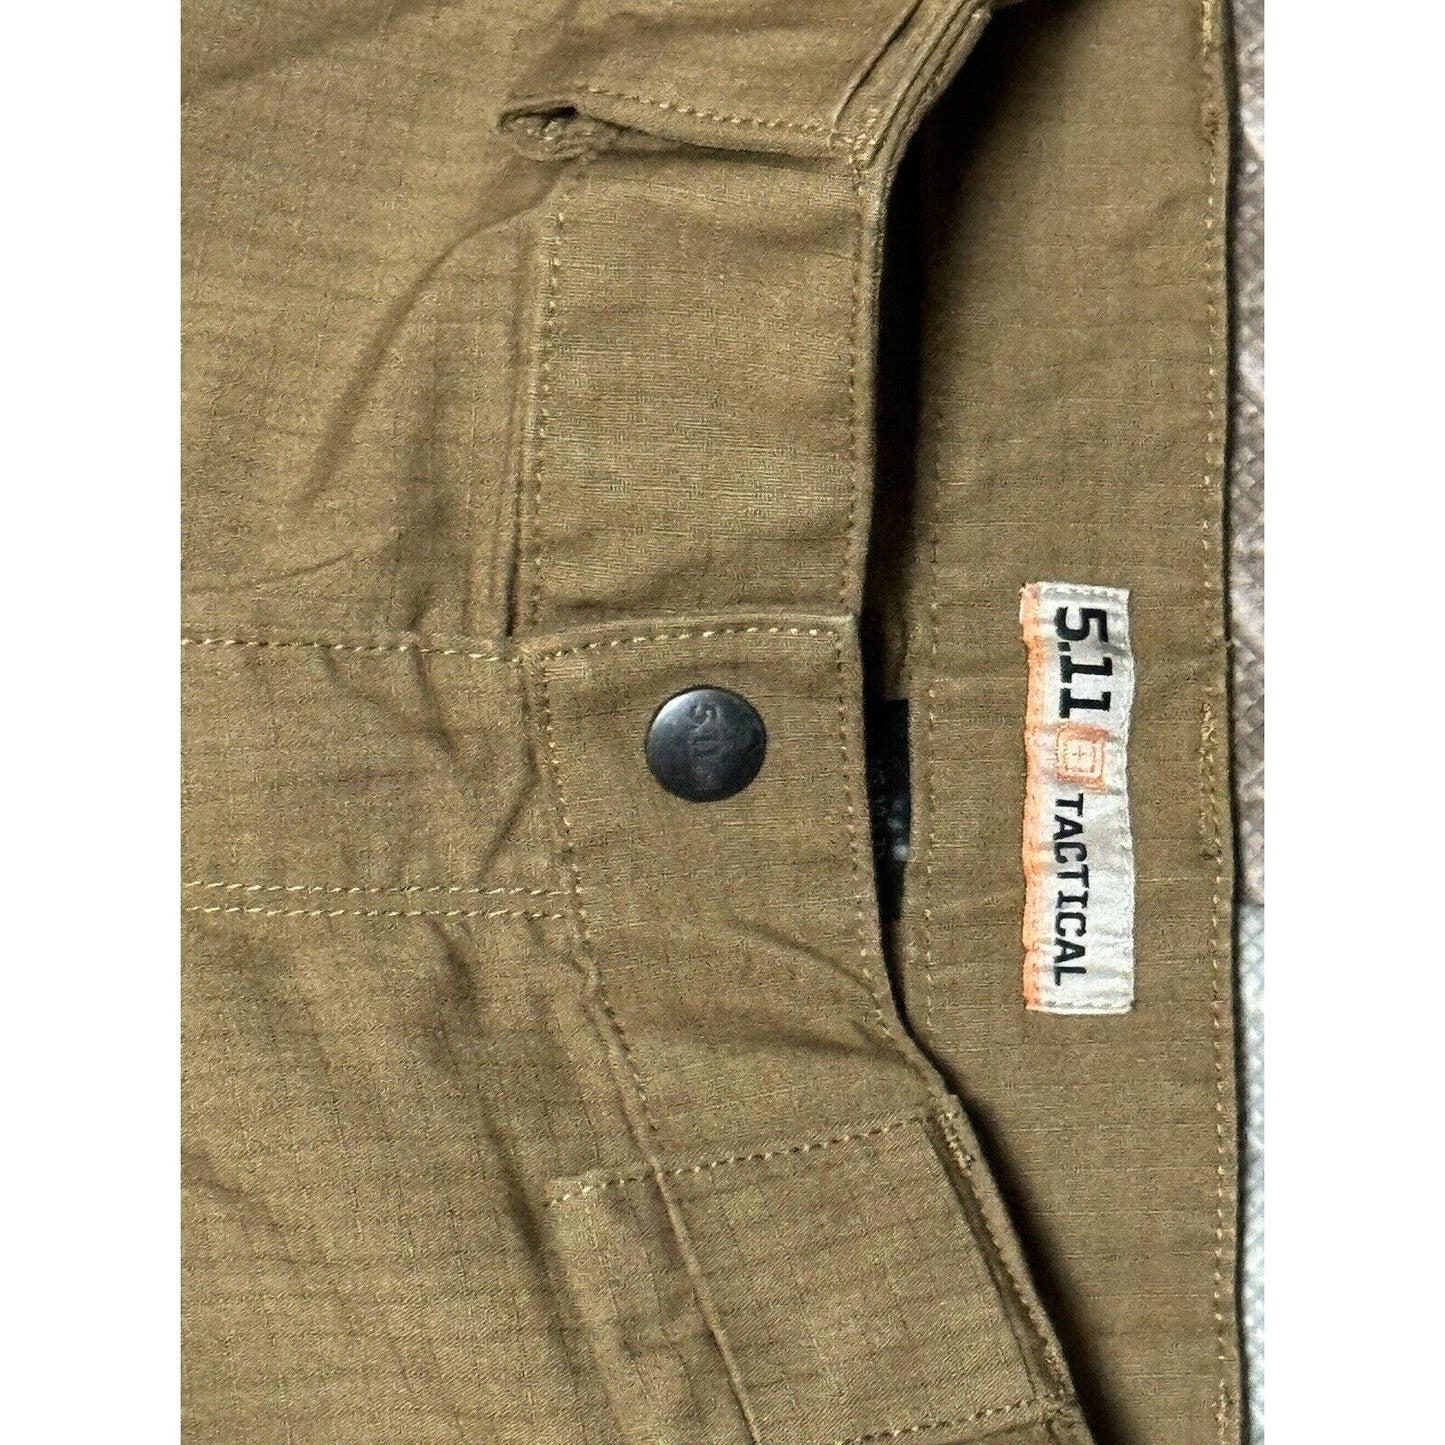 5.11 Tactical Stryke Mens Cargo Pants Brown Size 30x32